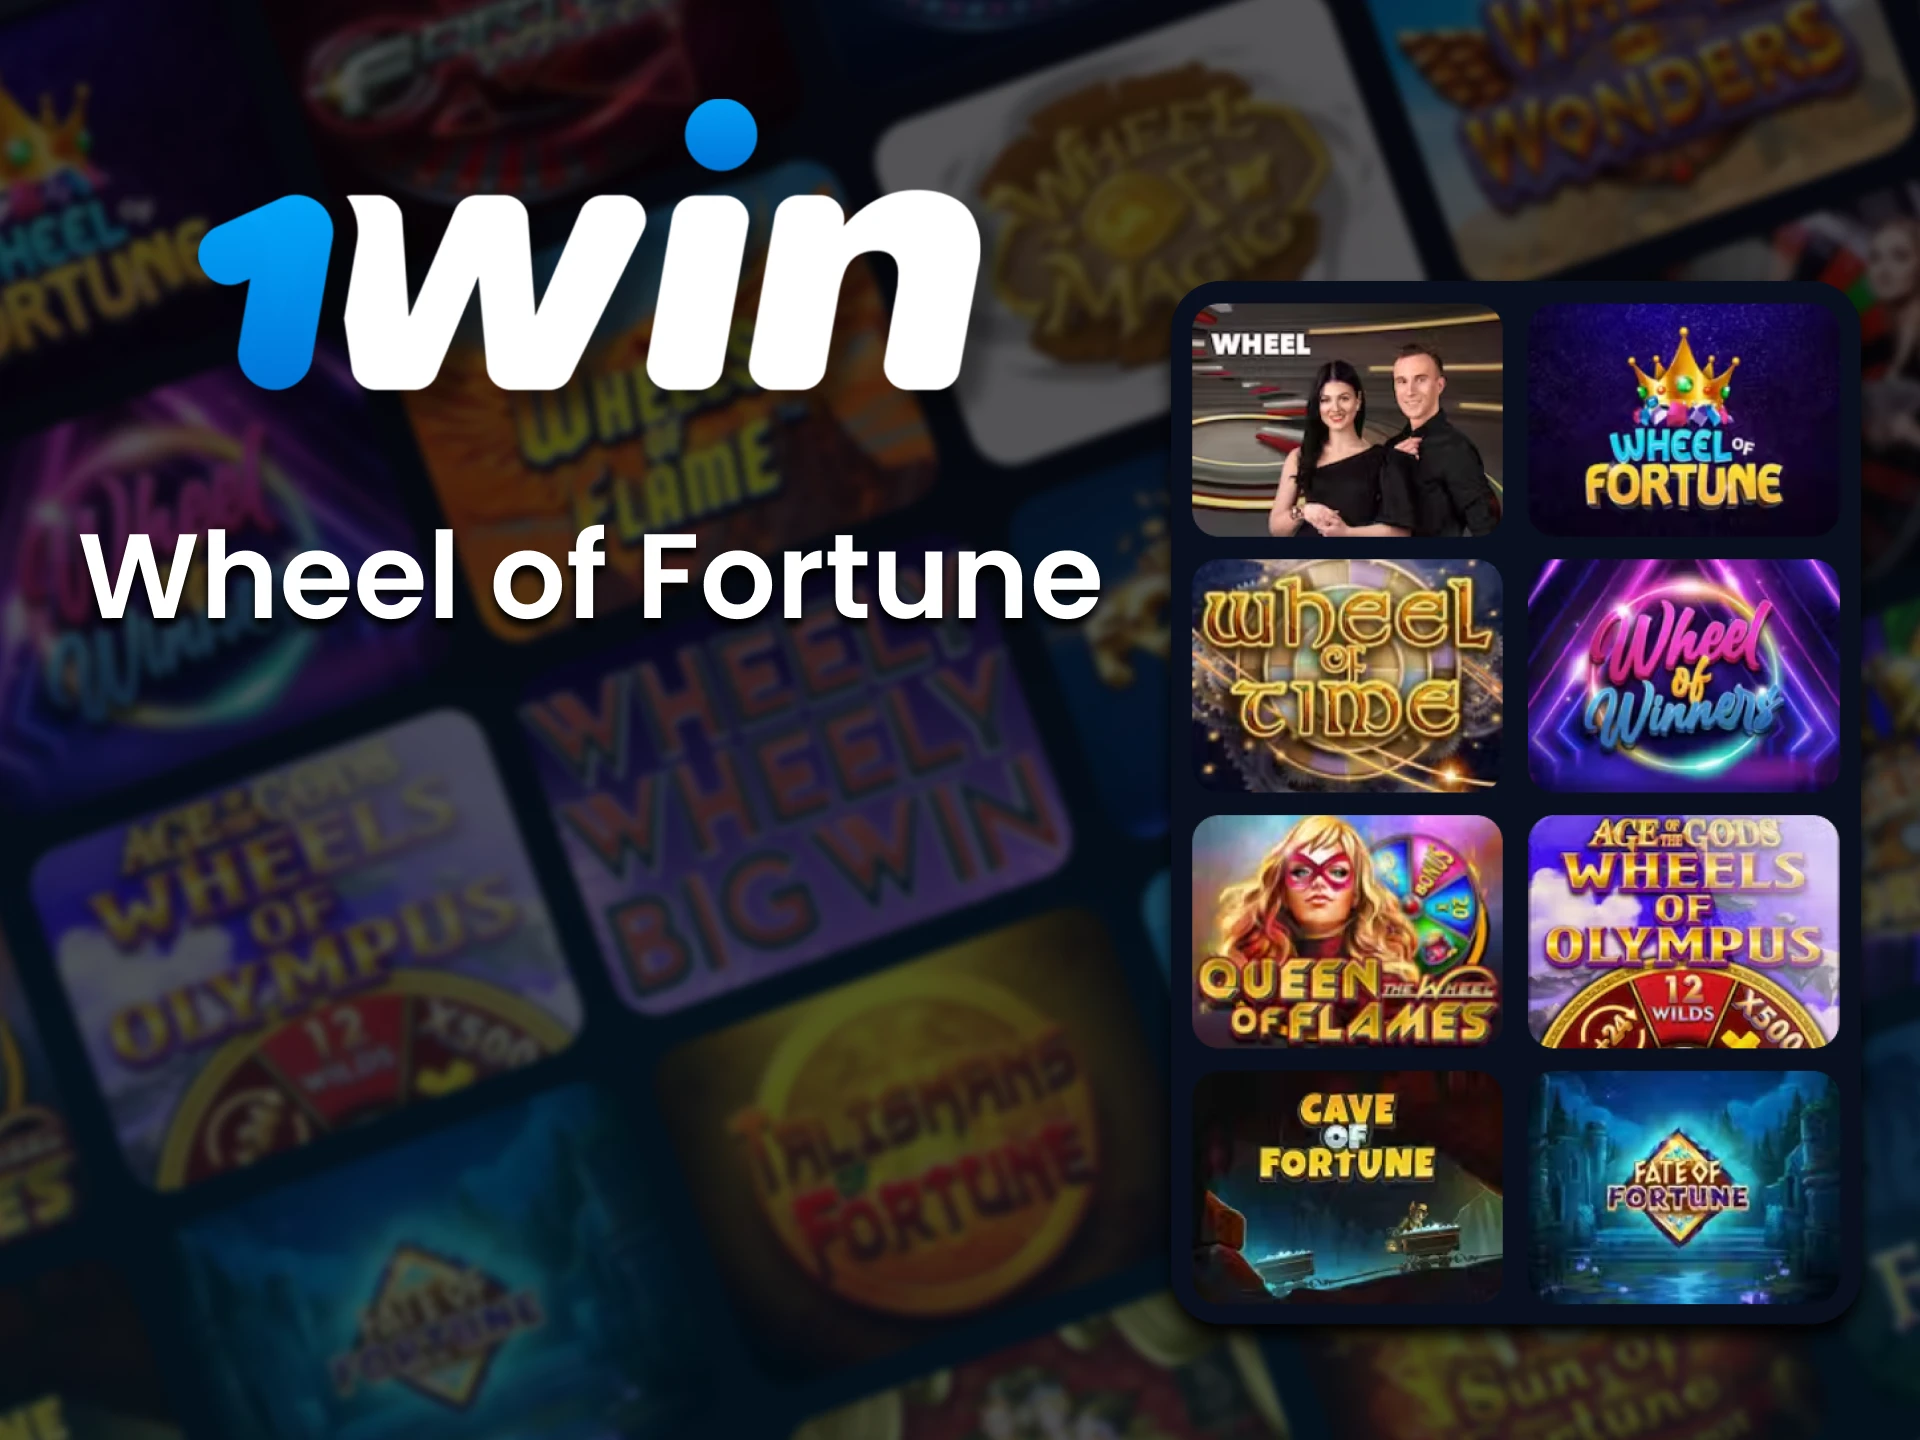 For casino games at 1win choose Wheel of Fortune.